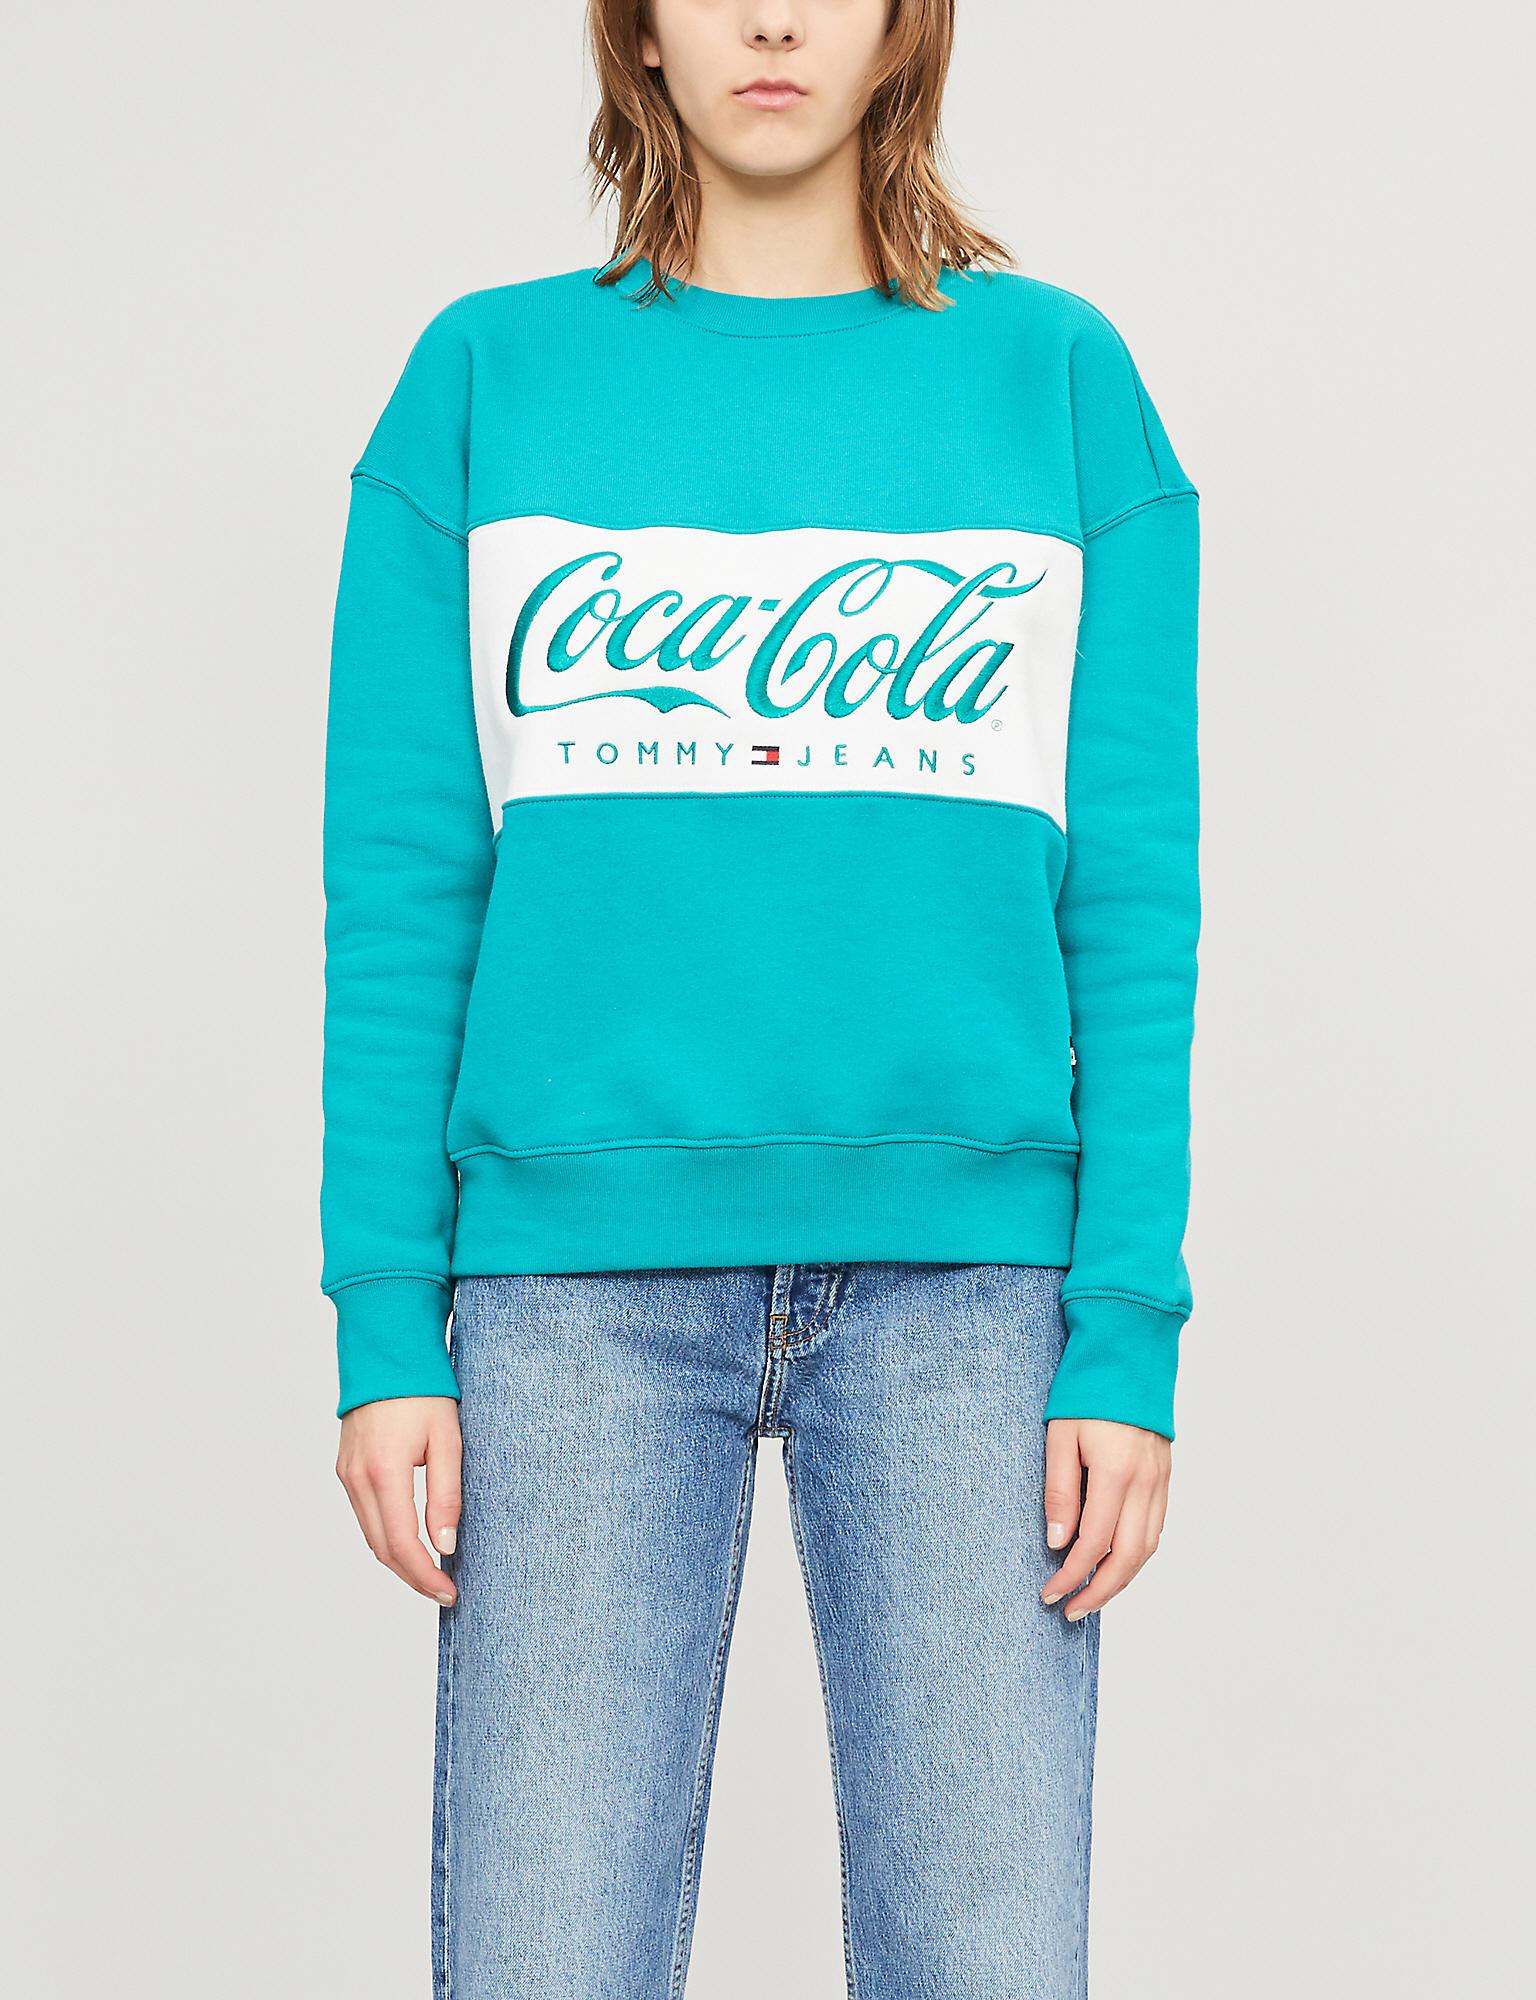 tommy jeans coca cola jumper Today's Deals- OFF-68% >Free Delivery